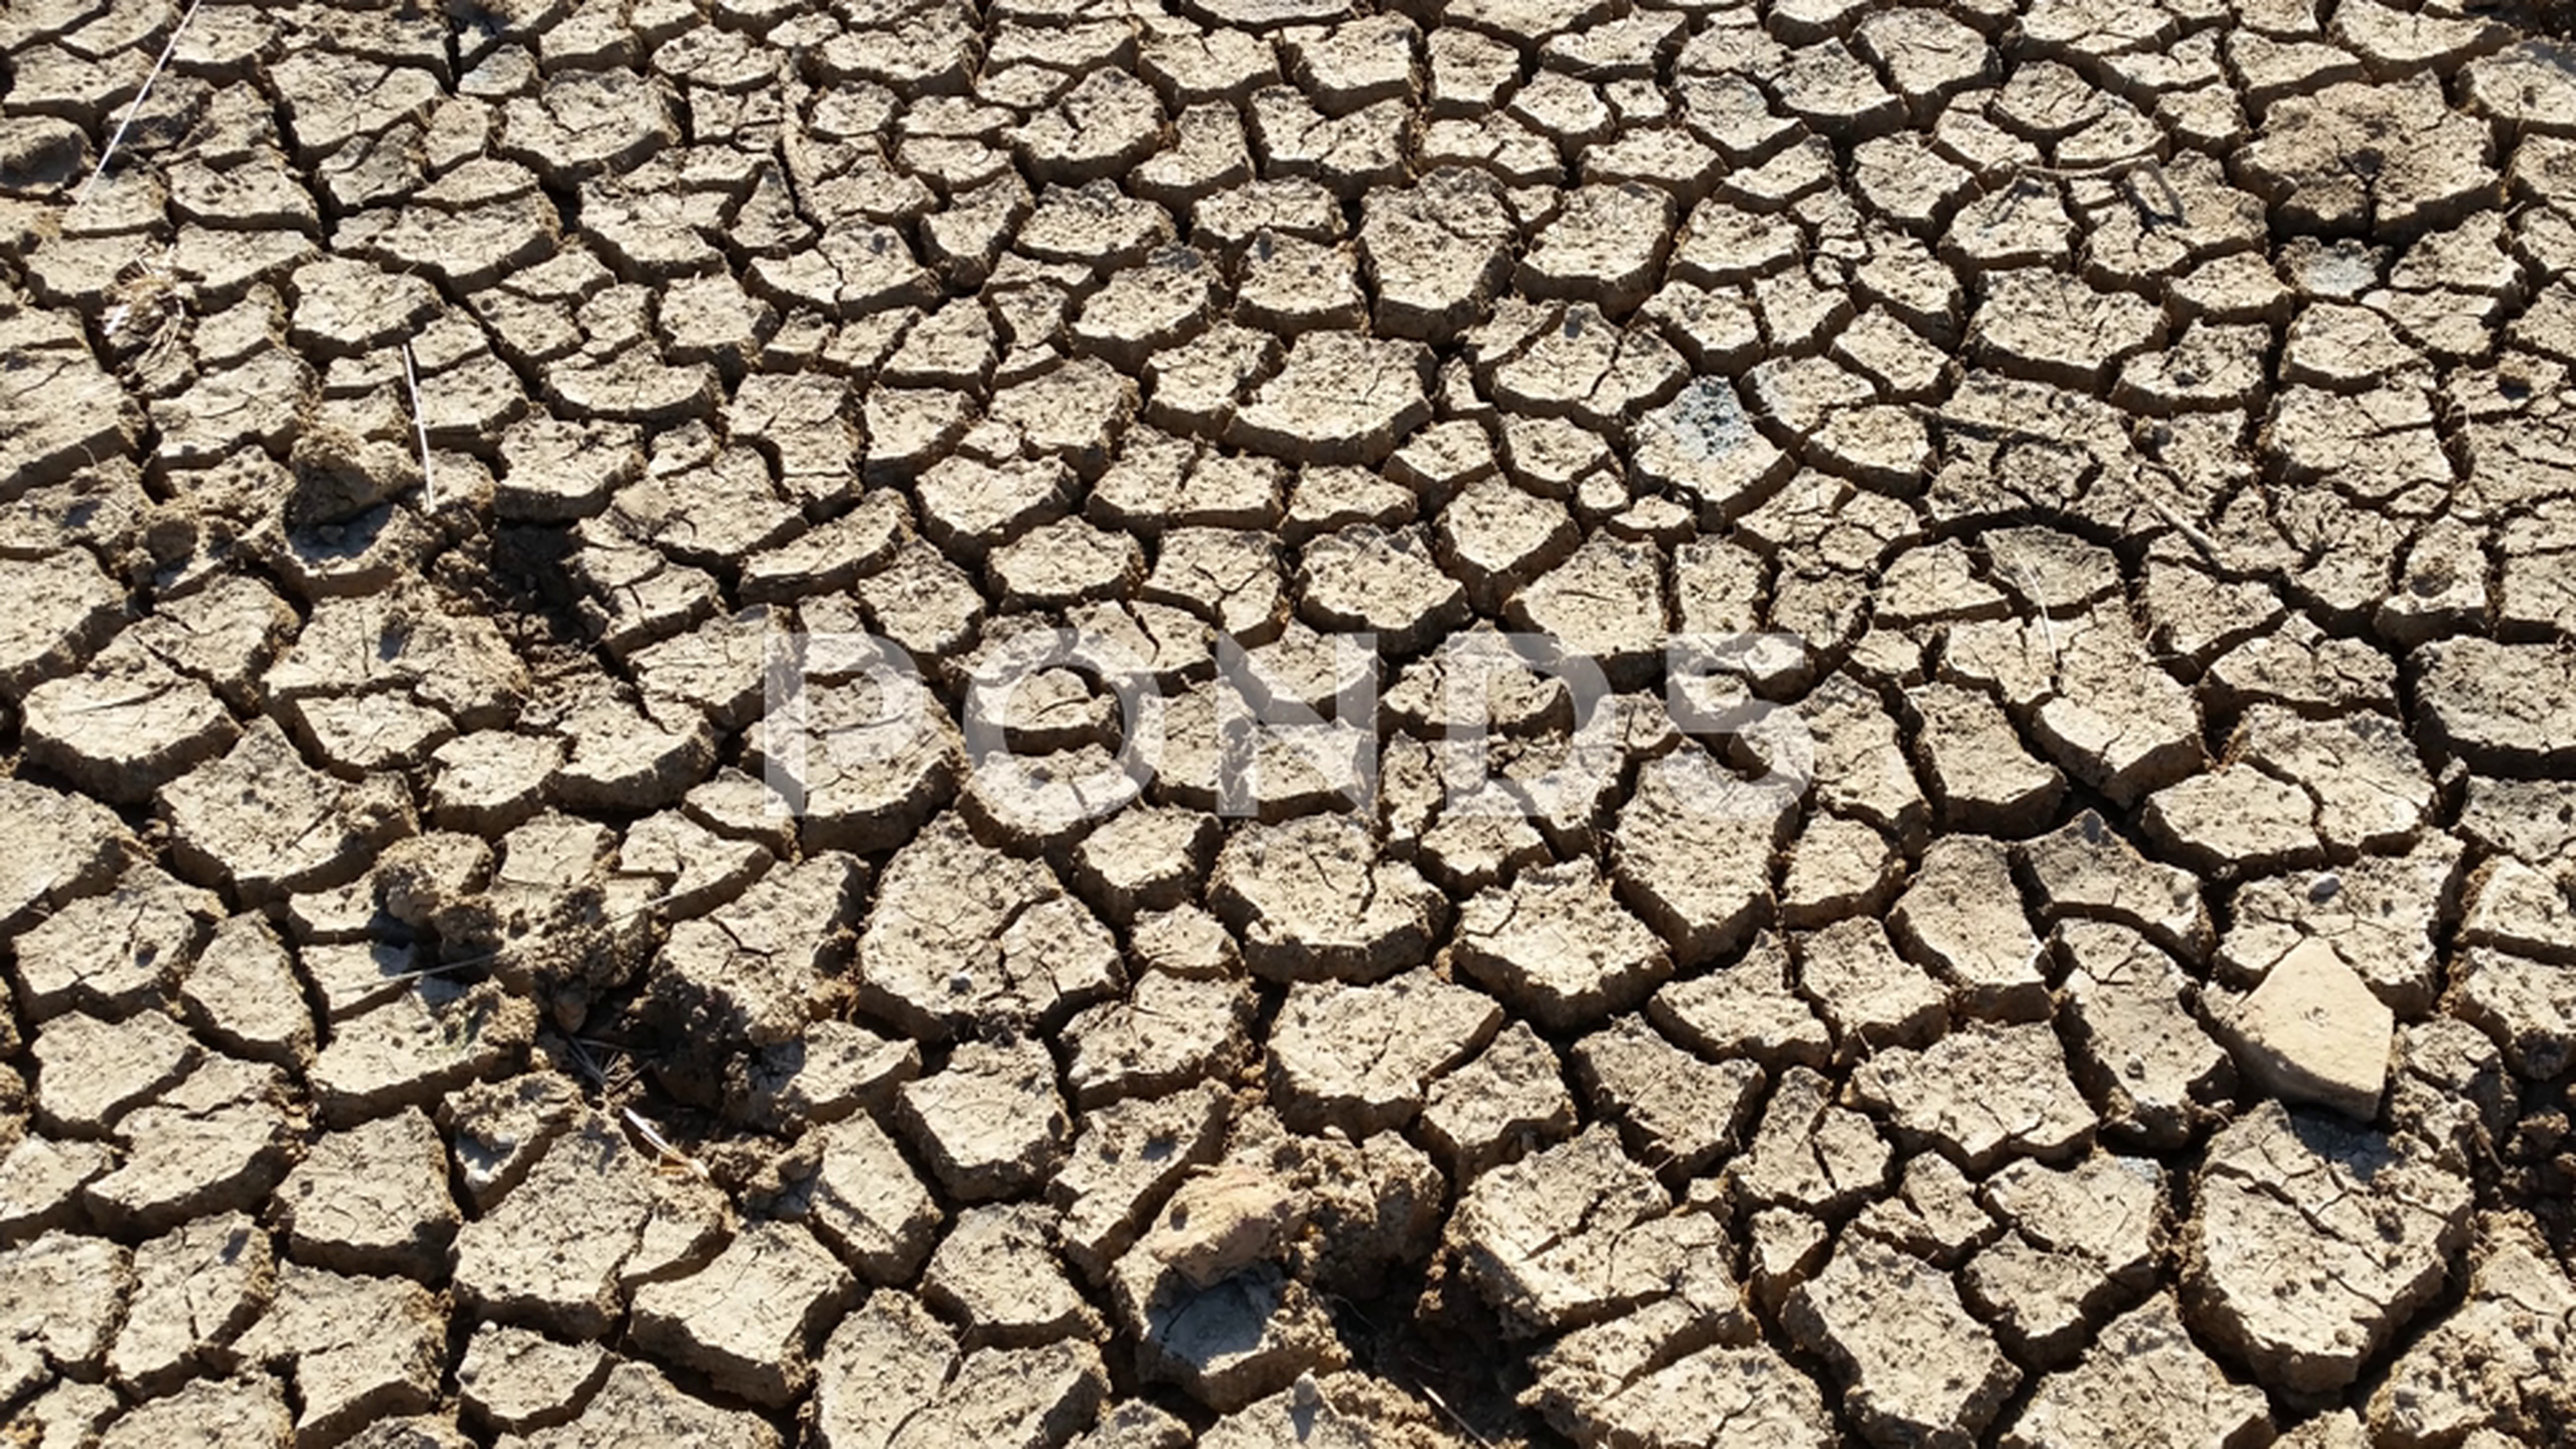 Hot Drought Cracked Clay Mud Dust Pan of Dry River Bed ~ Video #79512605